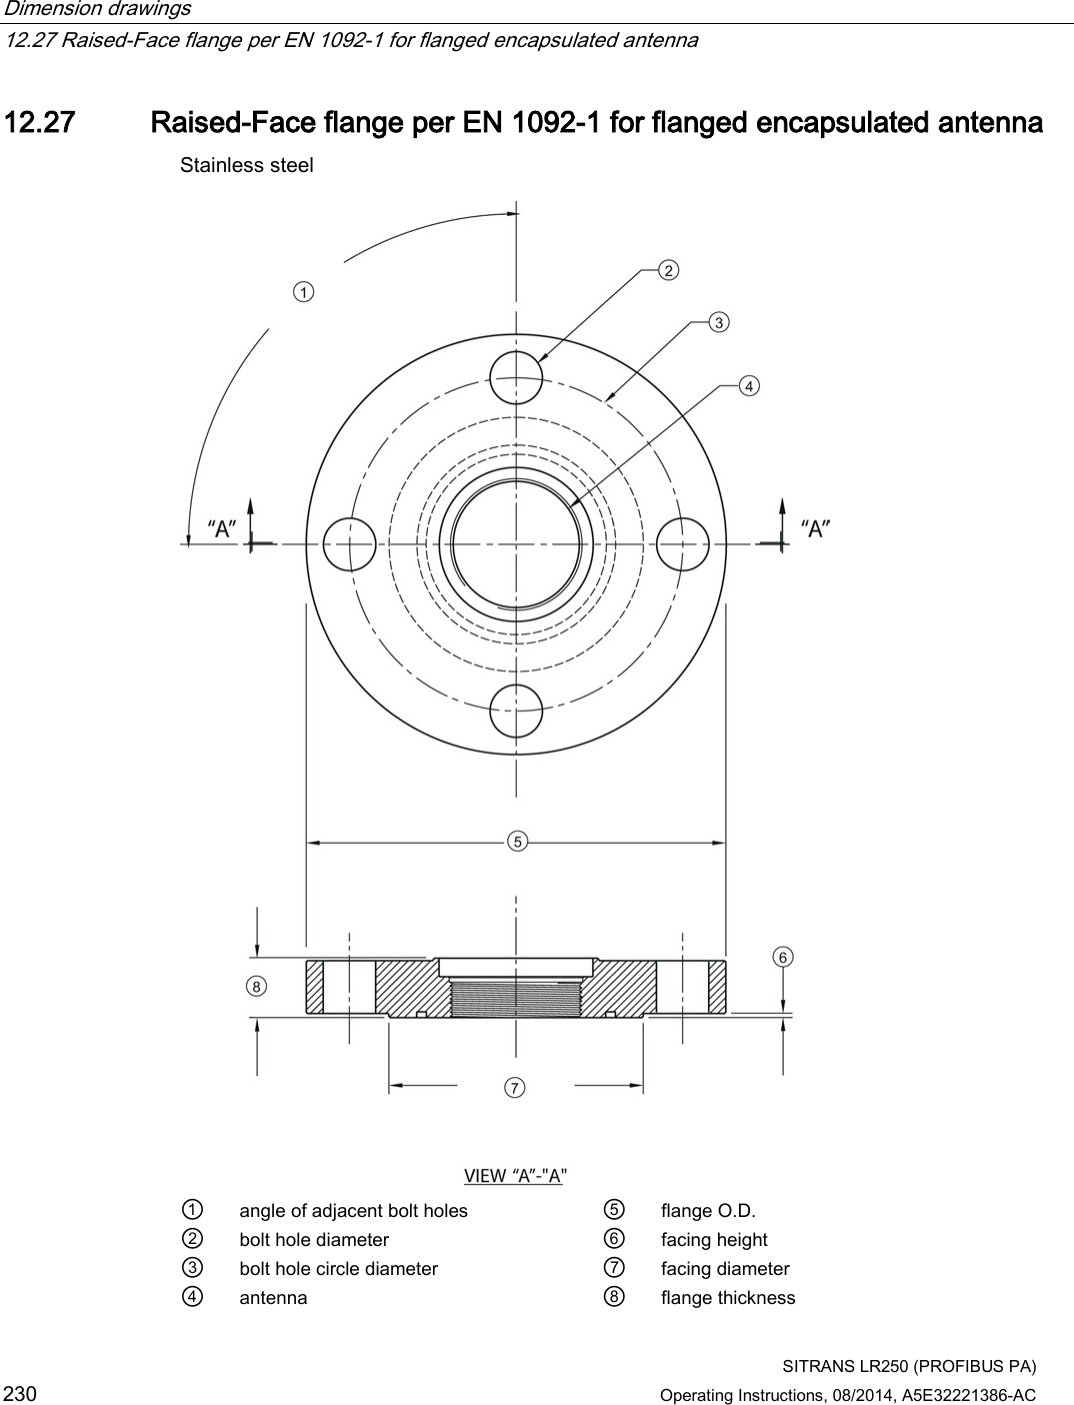 Dimension drawings   12.27 Raised-Face flange per EN 1092-1 for flanged encapsulated antenna  SITRANS LR250 (PROFIBUS PA) 230 Operating Instructions, 08/2014, A5E32221386-AC 12.27 Raised-Face flange per EN 1092-1 for flanged encapsulated antenna Stainless steel  ① angle of adjacent bolt holes ⑤ flange O.D. ② bolt hole diameter ⑥ facing height ③ bolt hole circle diameter ⑦ facing diameter ④ antenna ⑧ flange thickness 